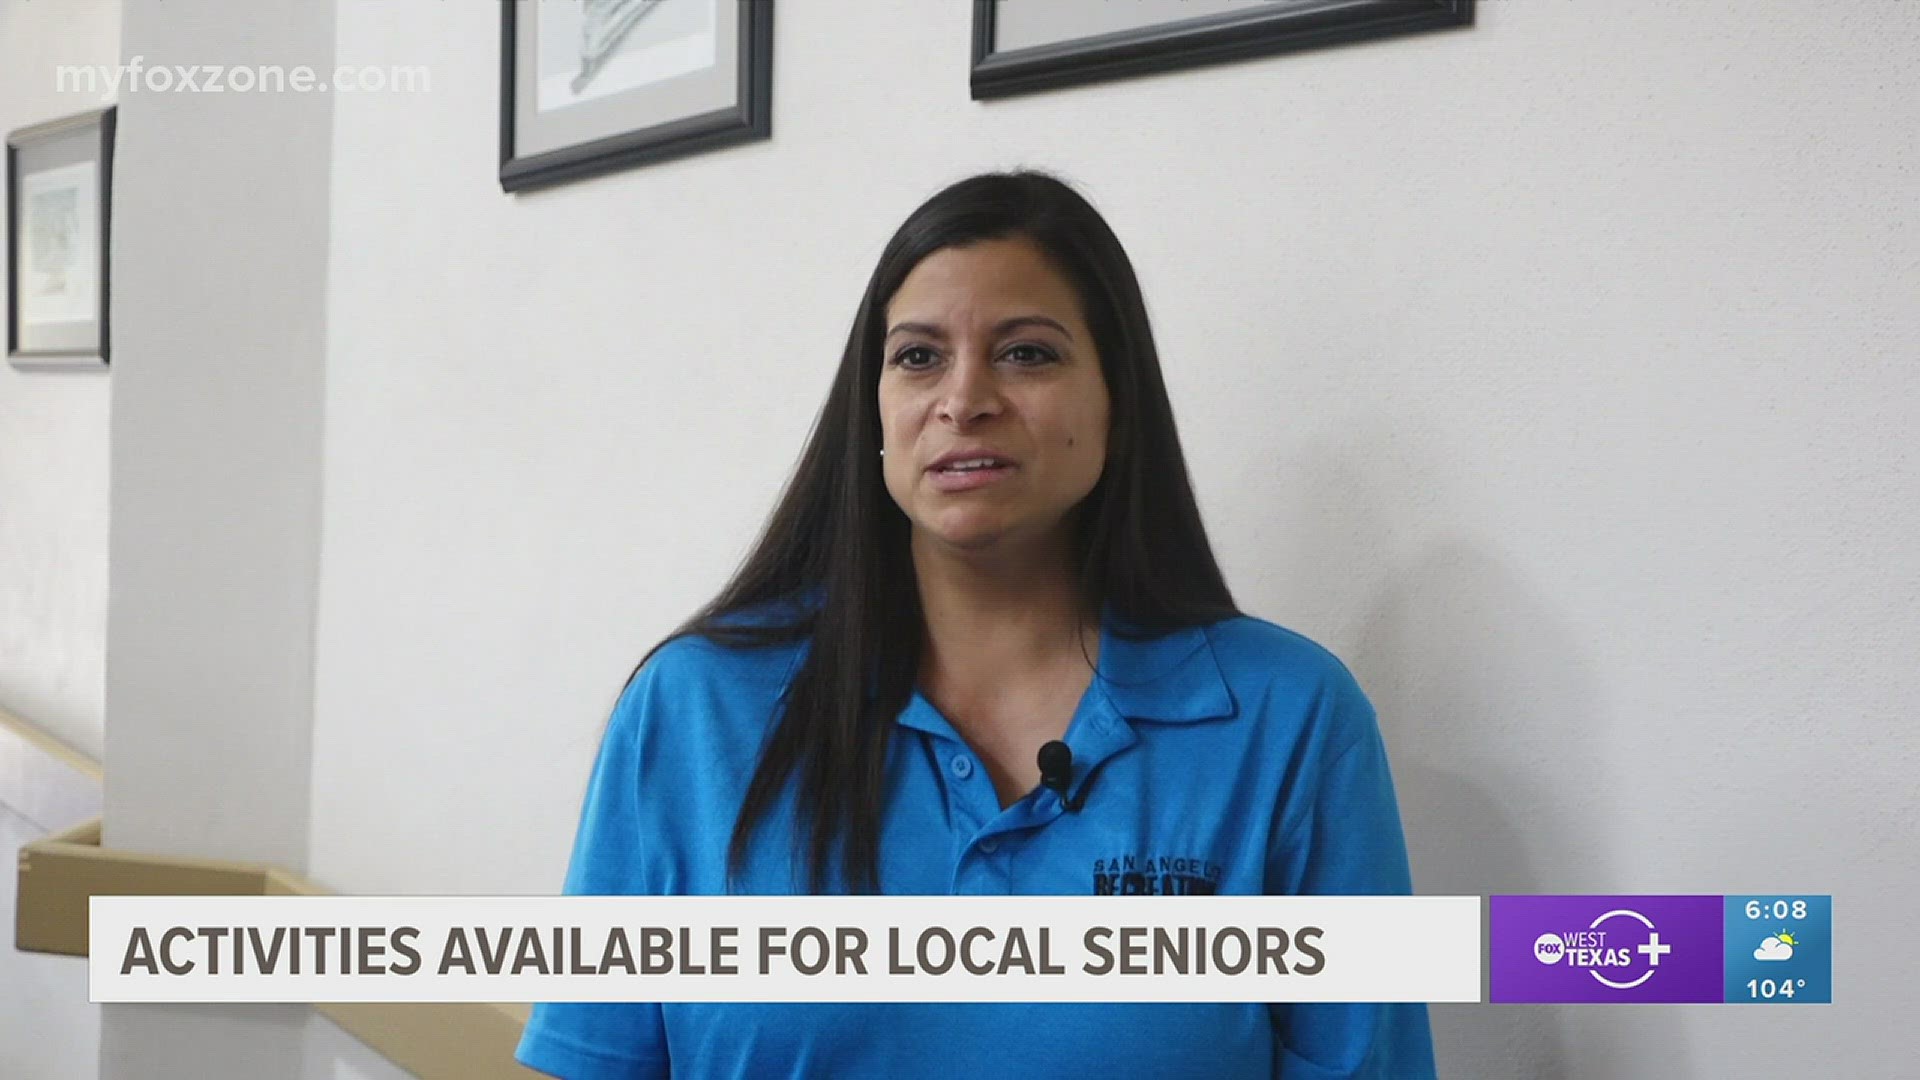 San Angelo's Senior Center offers guests multiple activities year round.